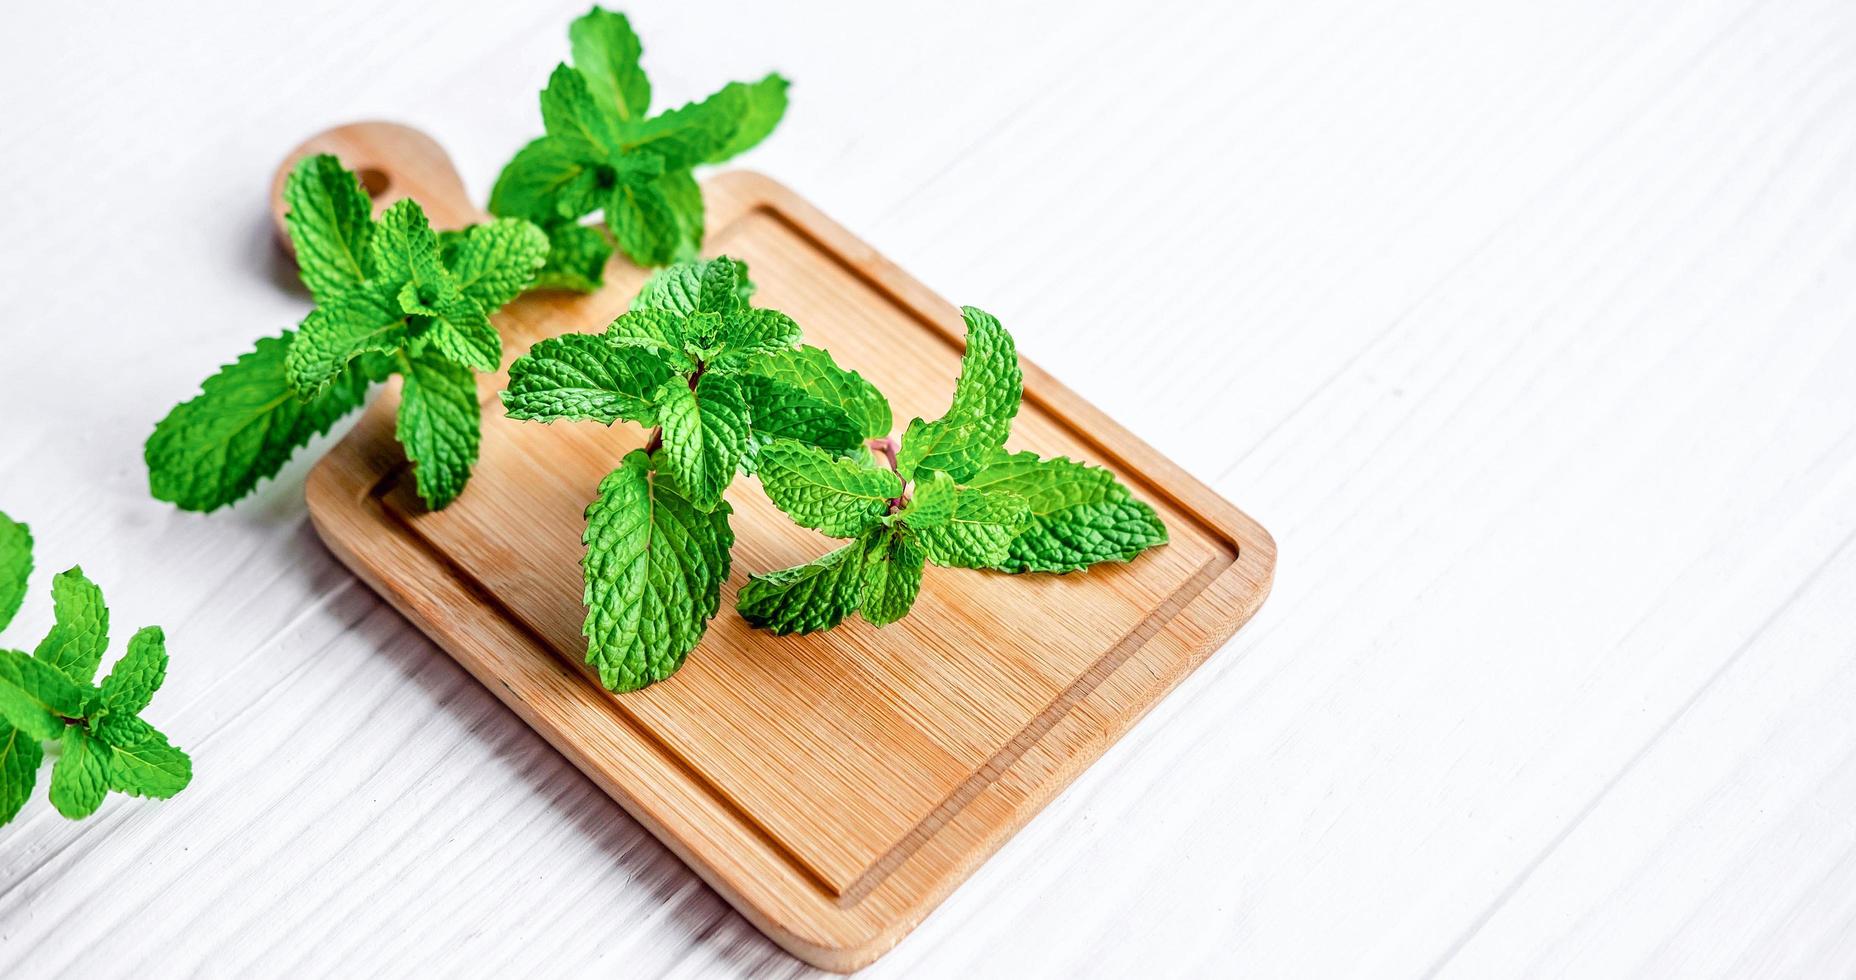 Mint leaf or Fresh mint on a wooden chopping board on white background photo